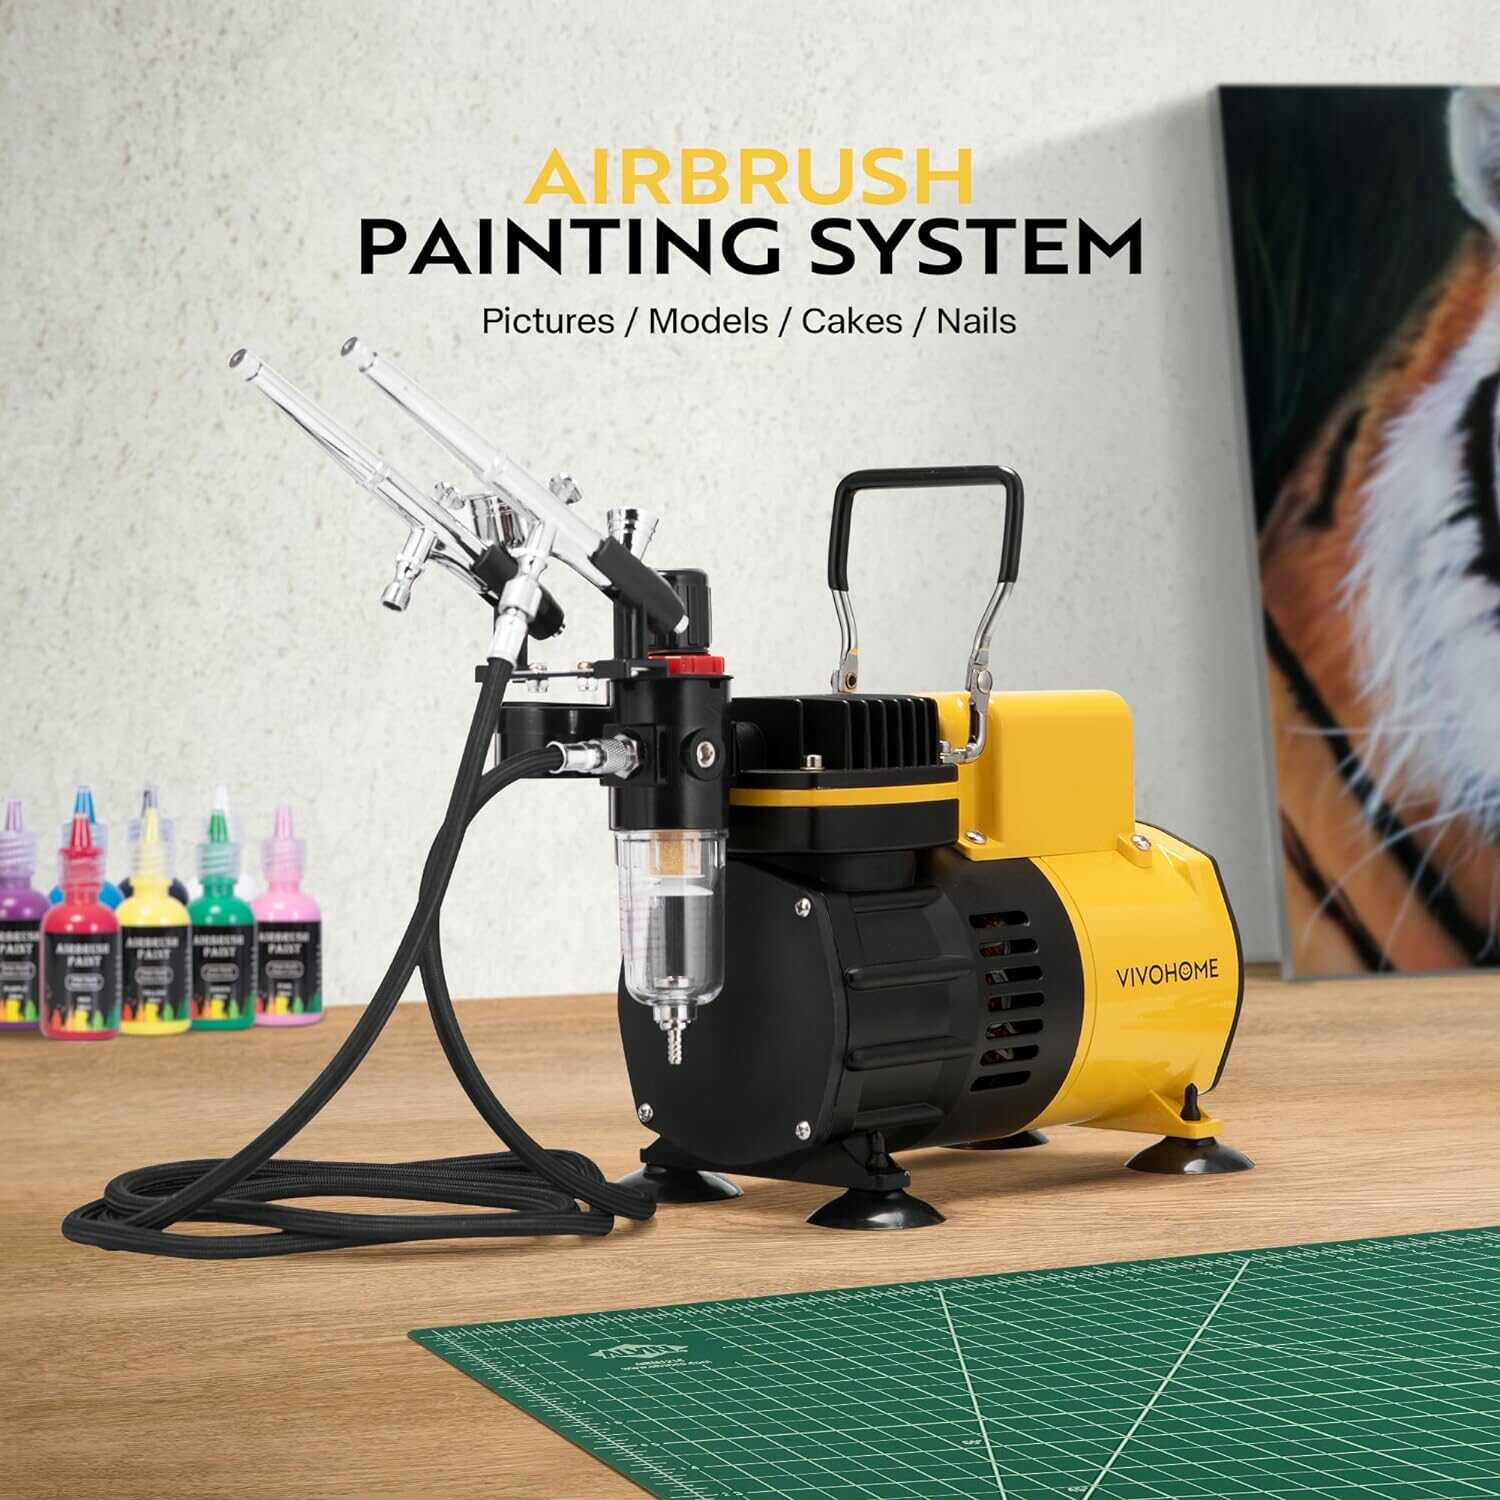 VIVOHOME 110-120V Professional Airbrushing Paint System, Yellow